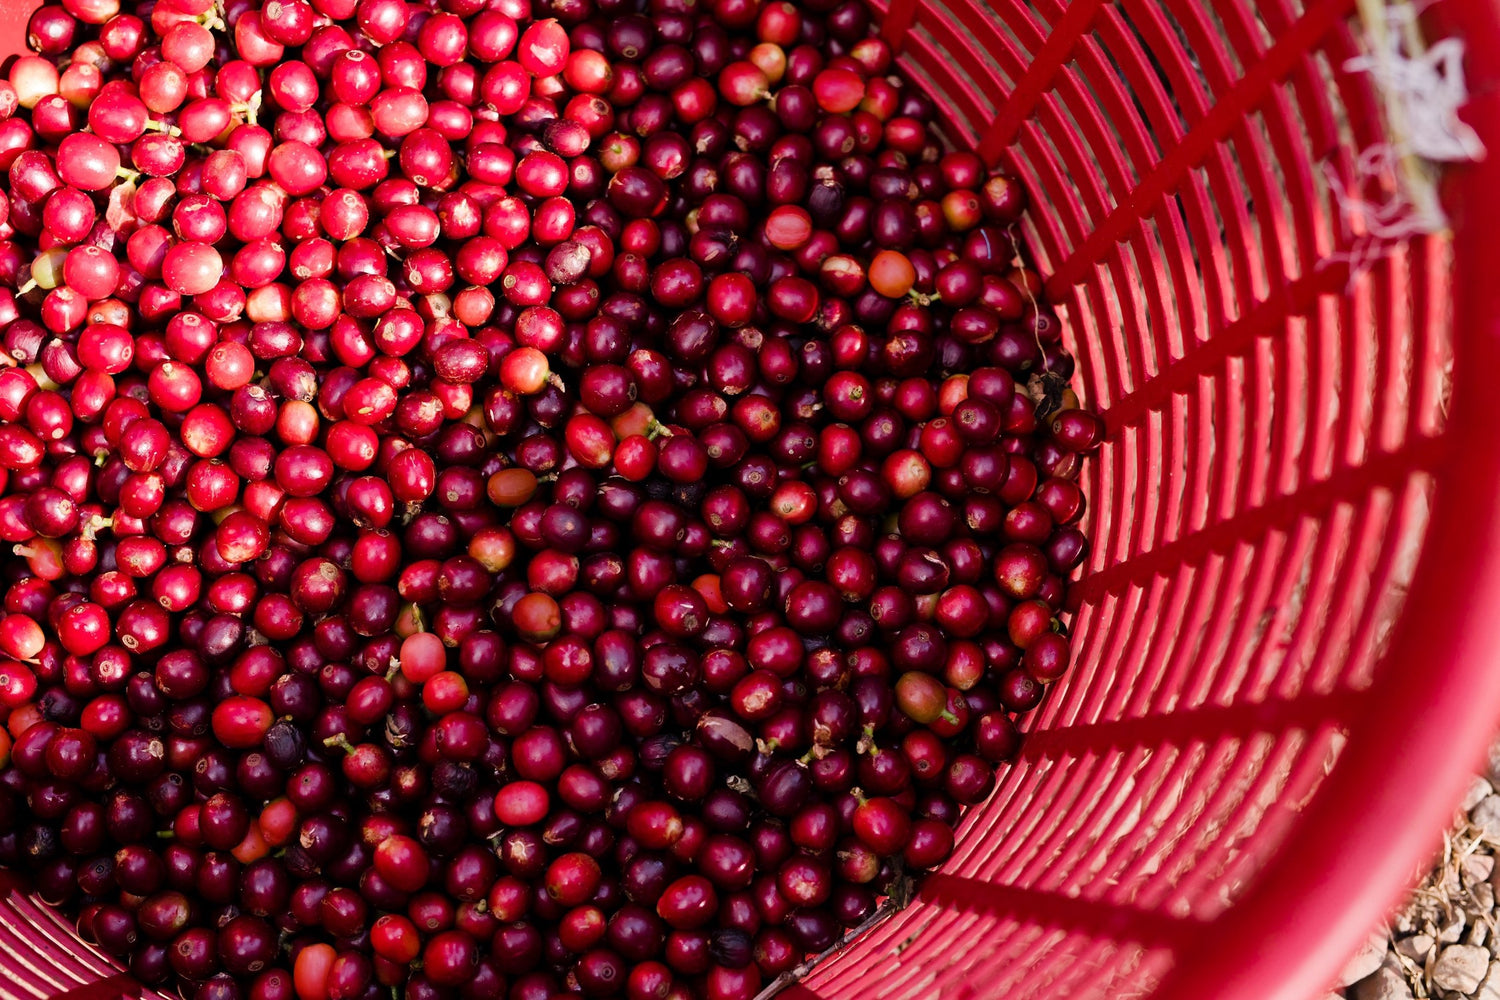 The Human Bean Coffee Franchise Quality Care Basket of red cherries